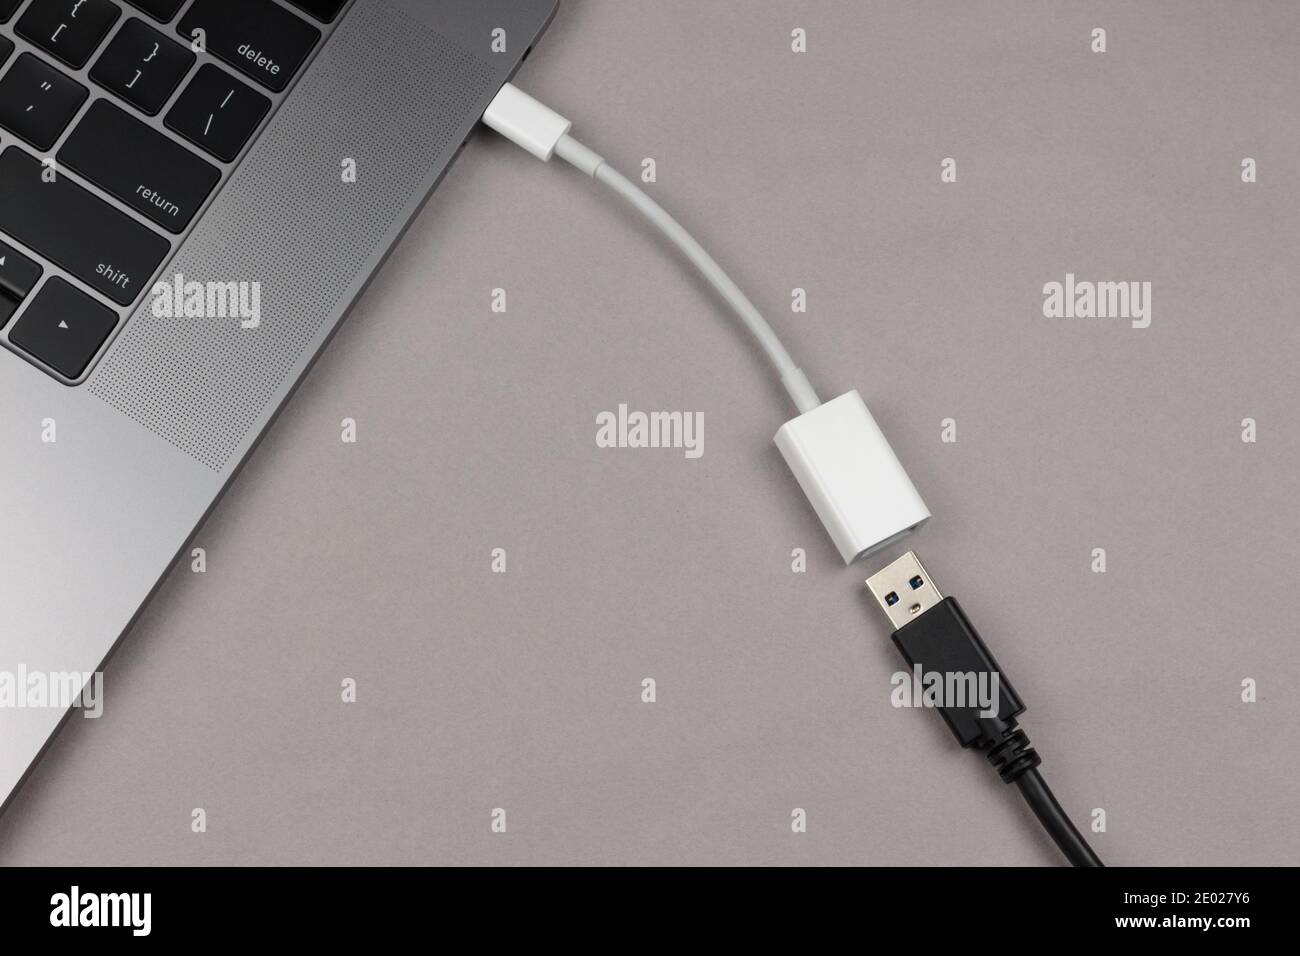 a usb-c to usb adapter connected to a with a usb cable next to